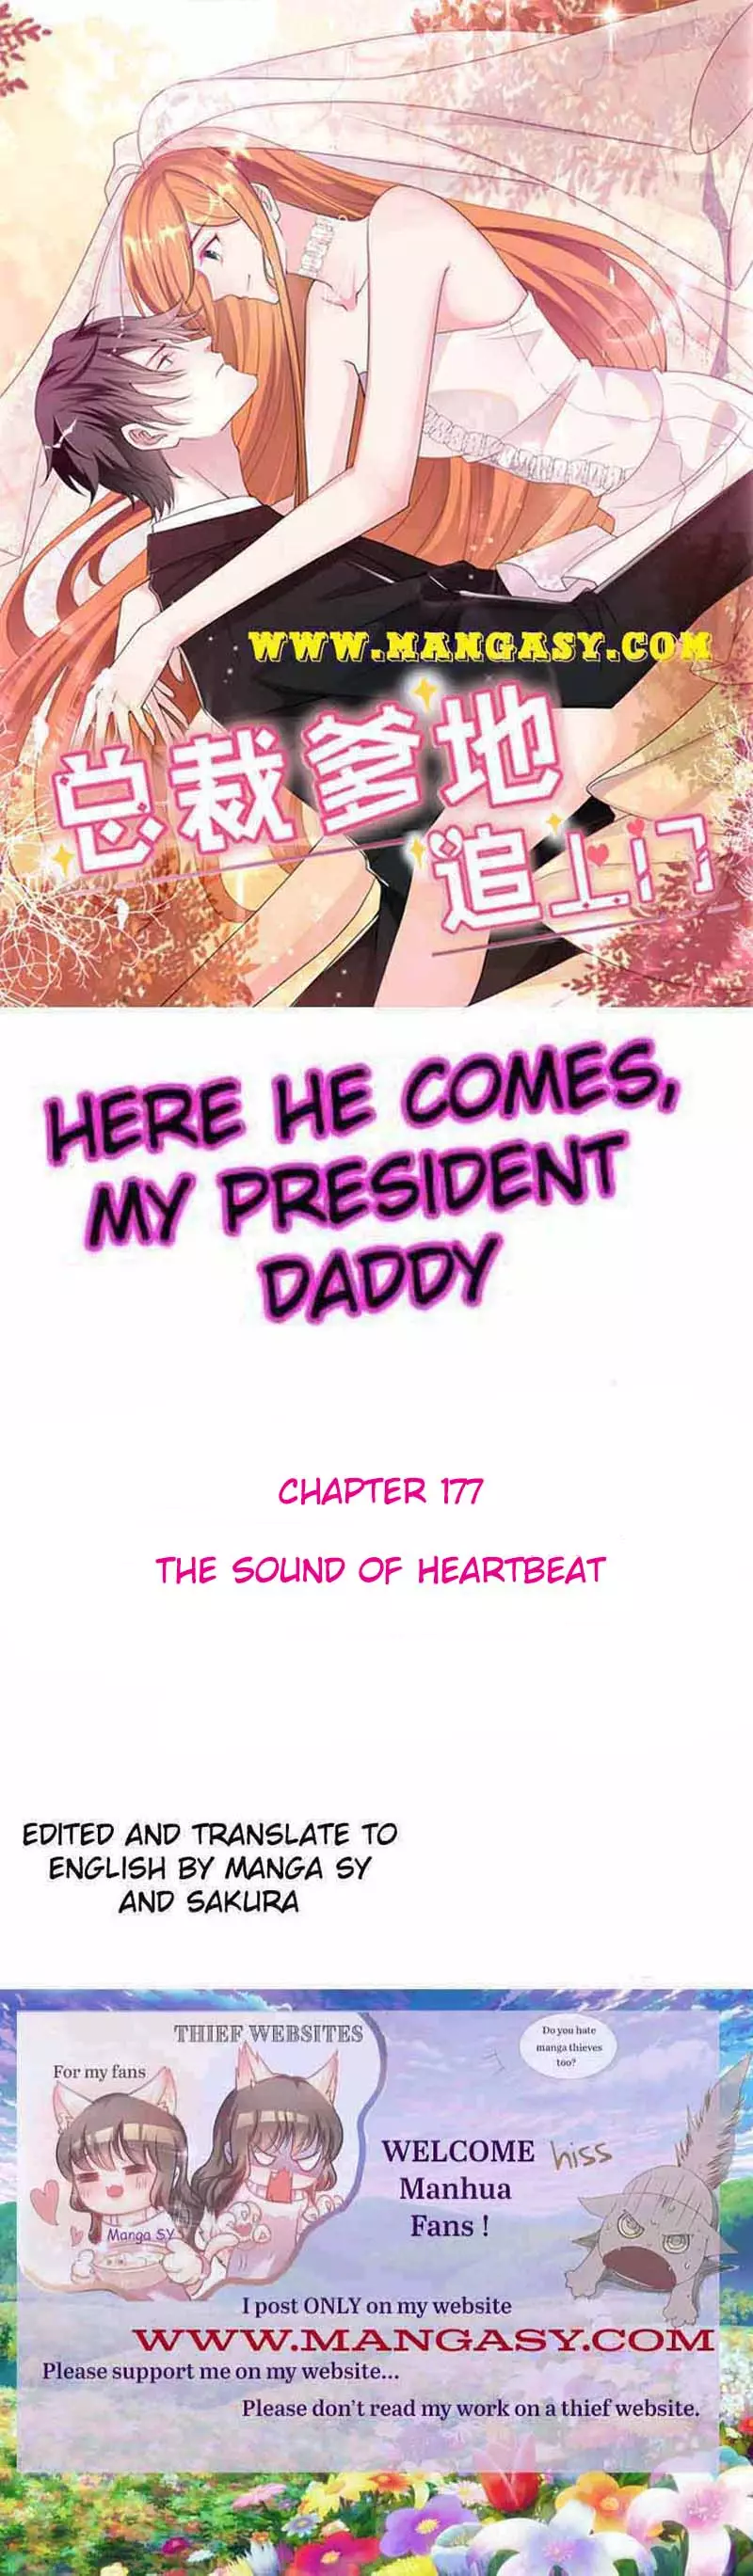 President Daddy Is Chasing You - 177 page 1-686d596f